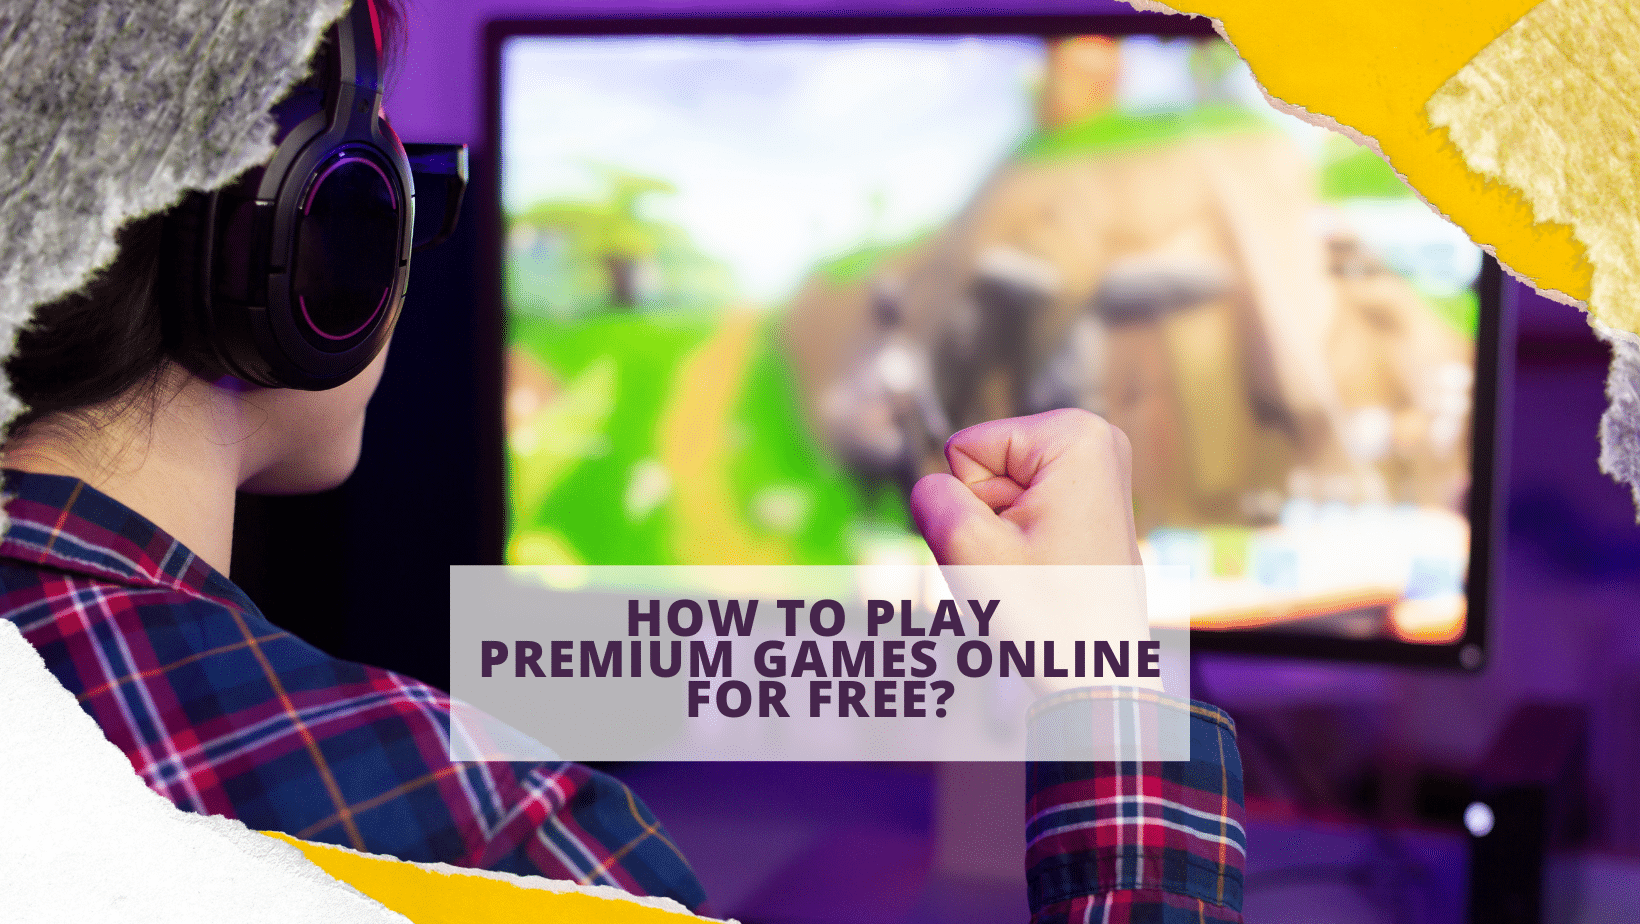 How To Play Premium Games Online For Free?